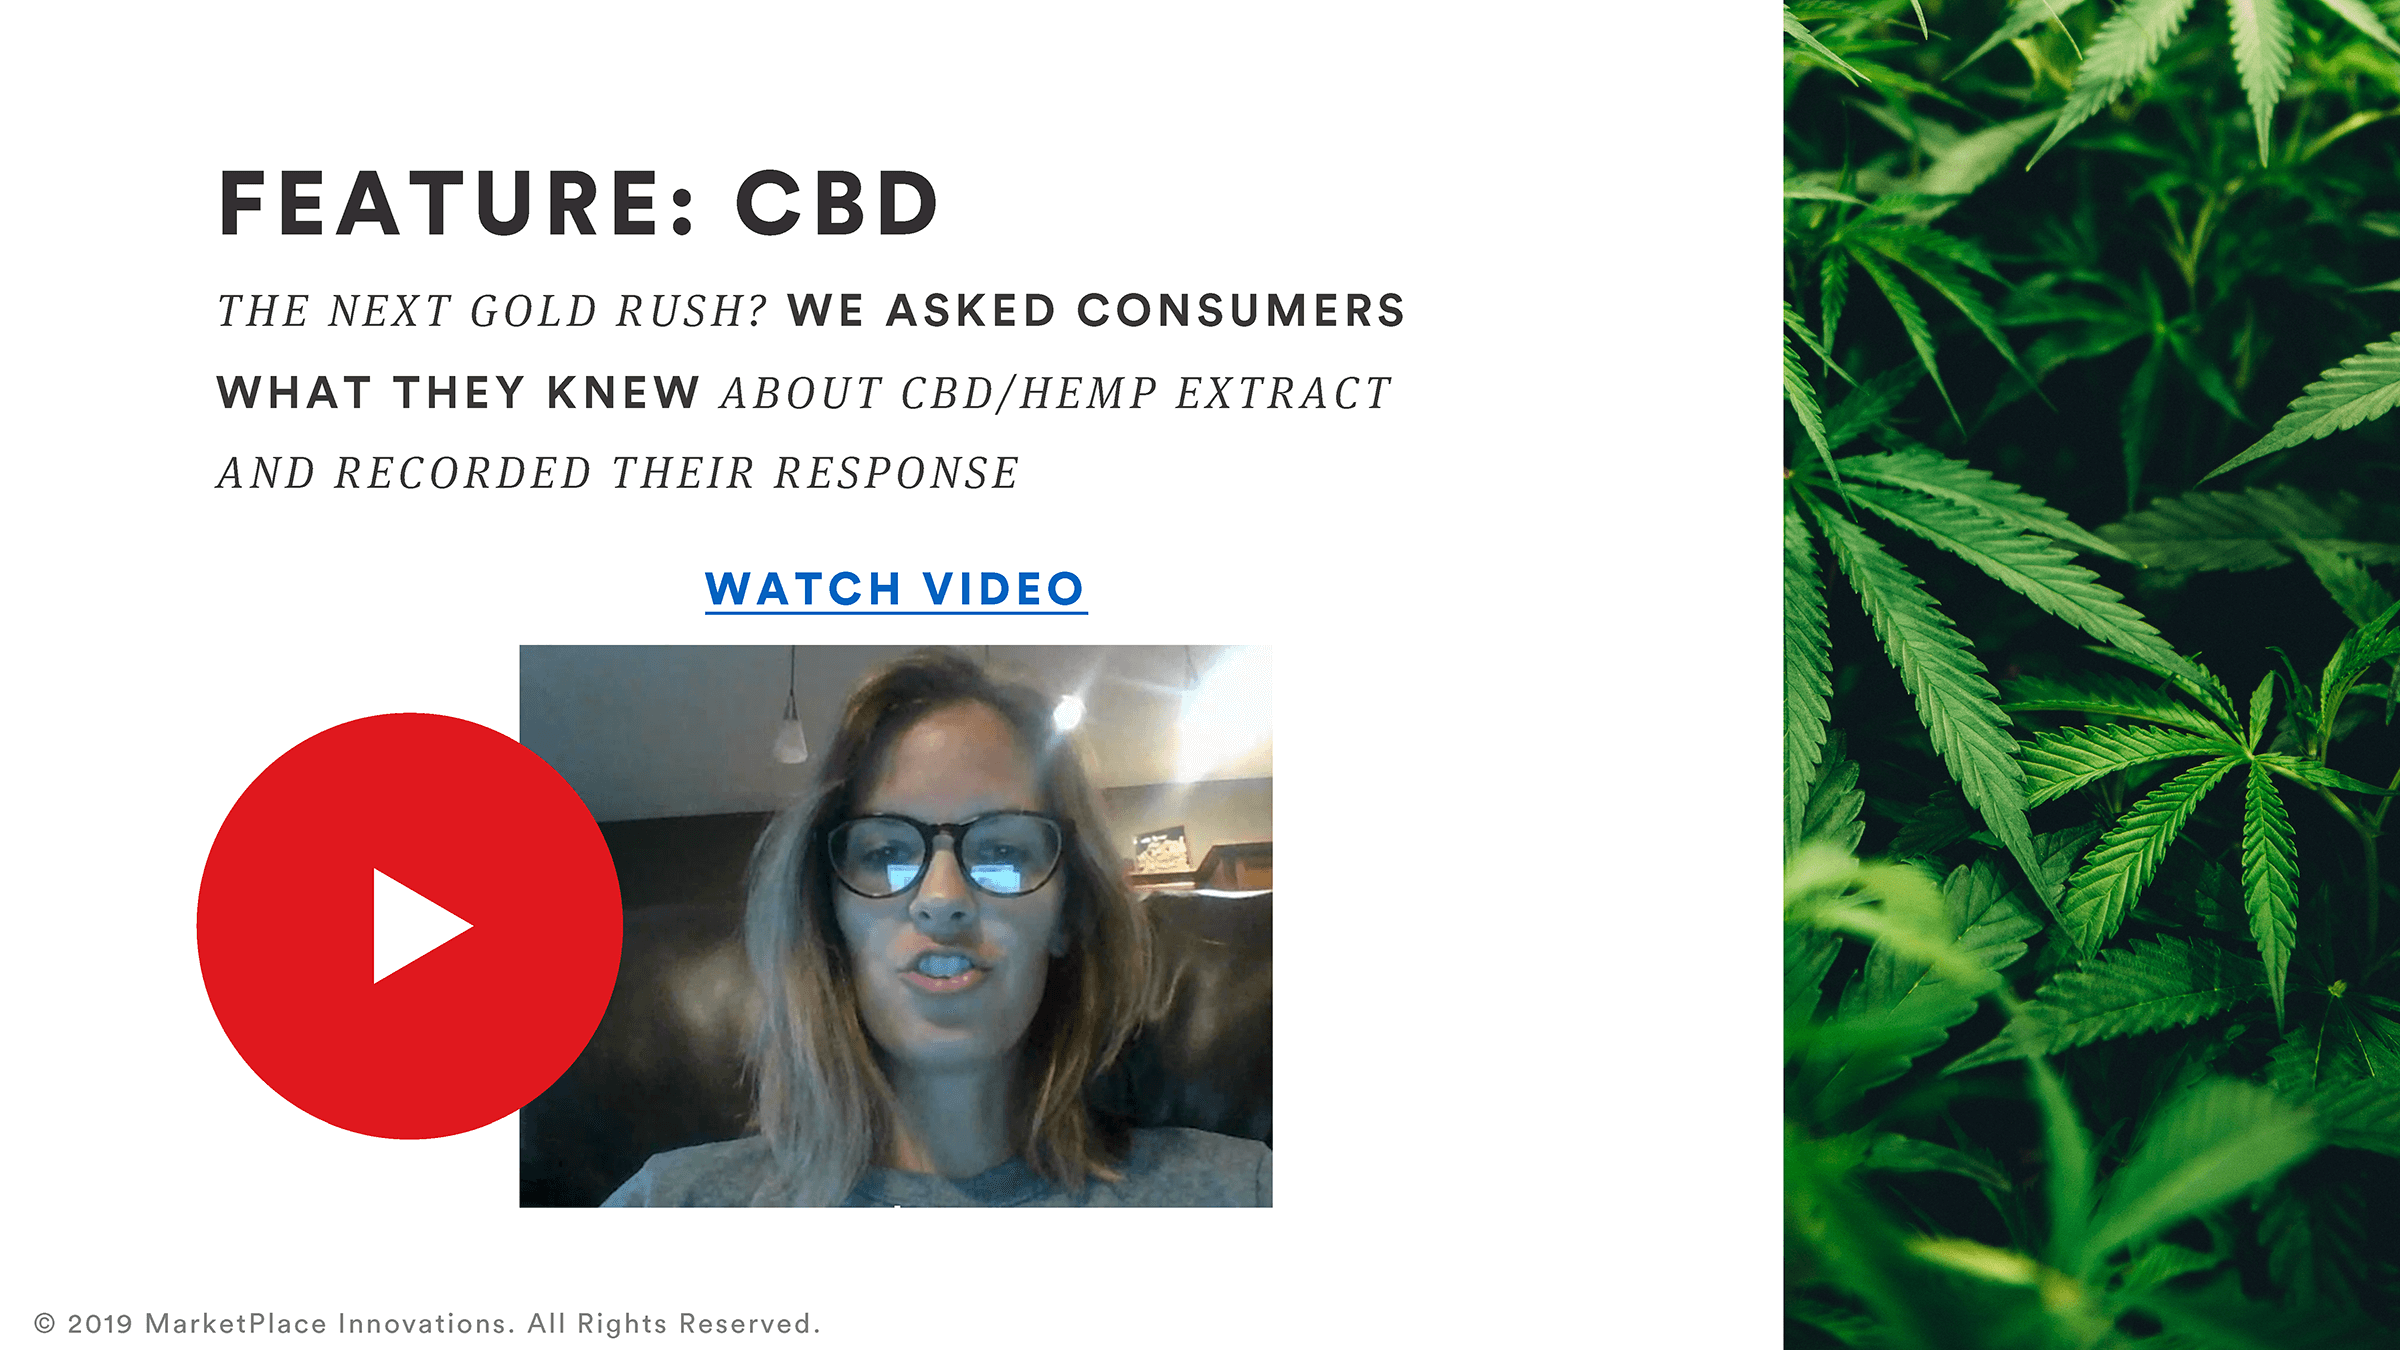 consumer responses to question about cbd